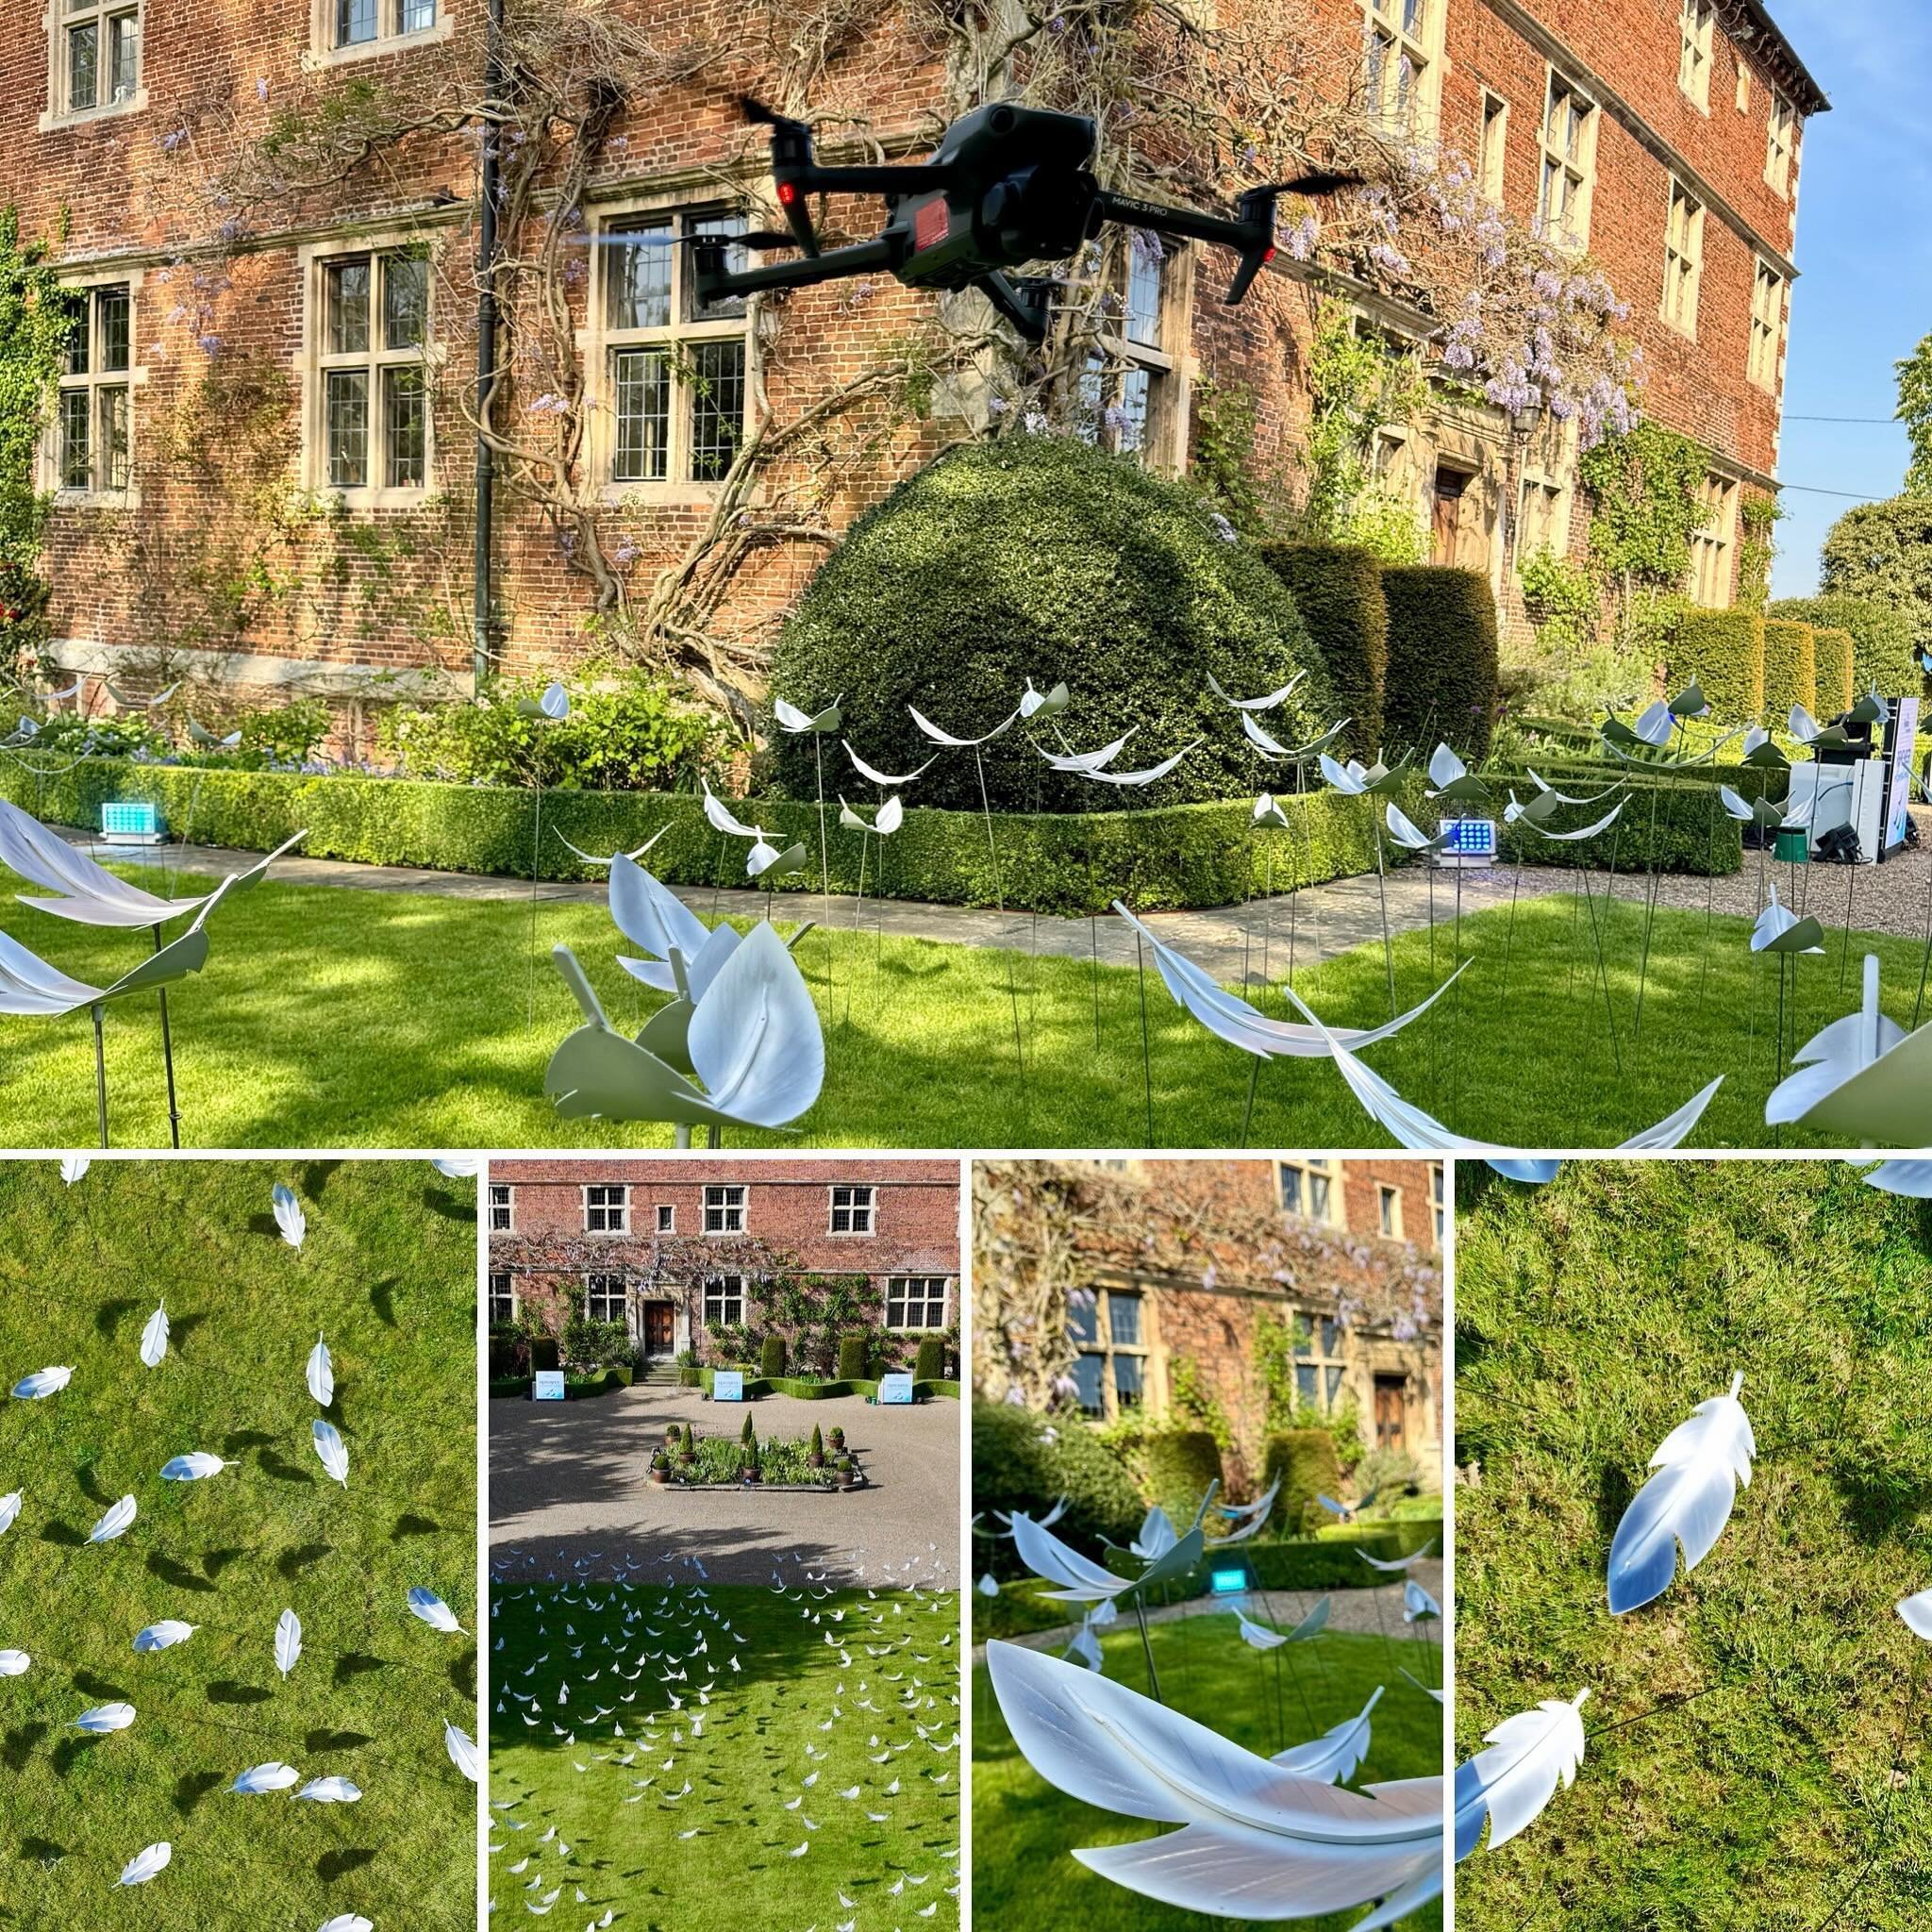 Really pleased to help out @stbarnabashospice 
St Barnabas Hospice to promote the Feathers from Above installation at Aubourn Hall and Gardens. It looks superb.🎥🎬

#thedroneman  #kurniaaerialphotography #DroneProduction #AerialProduction #DroneVide